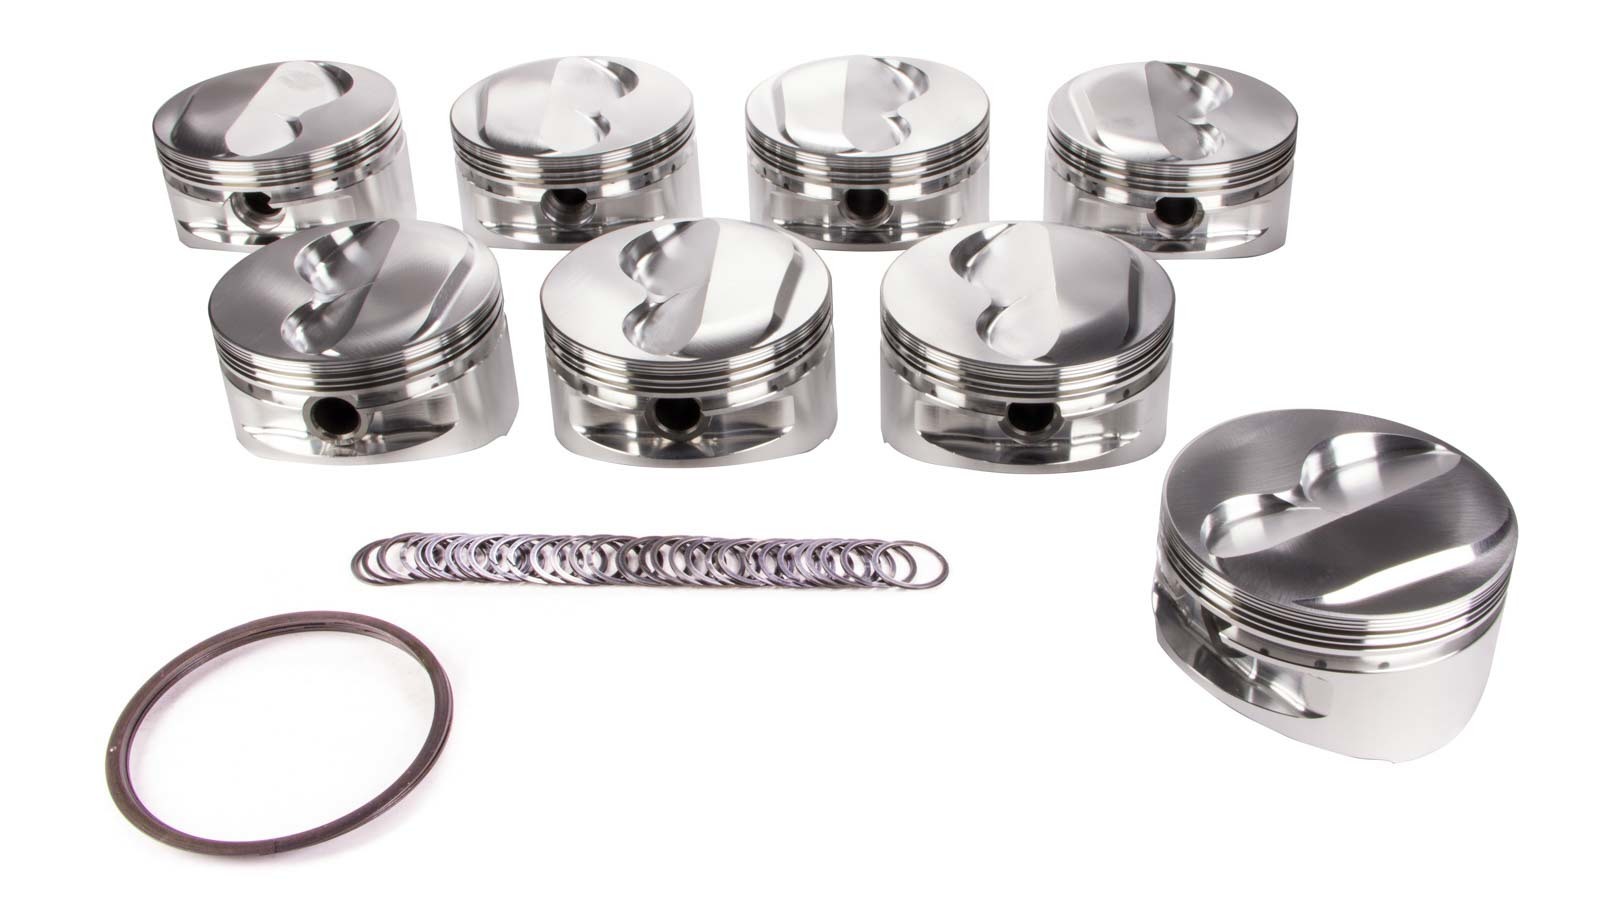 JE Pistons 182033 Piston, Small Block Dome, Forged, 4.125 in Bore, 1/16 x 1/16 x 3/16 in Ring Grooves, Plus 5.60 cc, Small Block Chevy, Set of 8